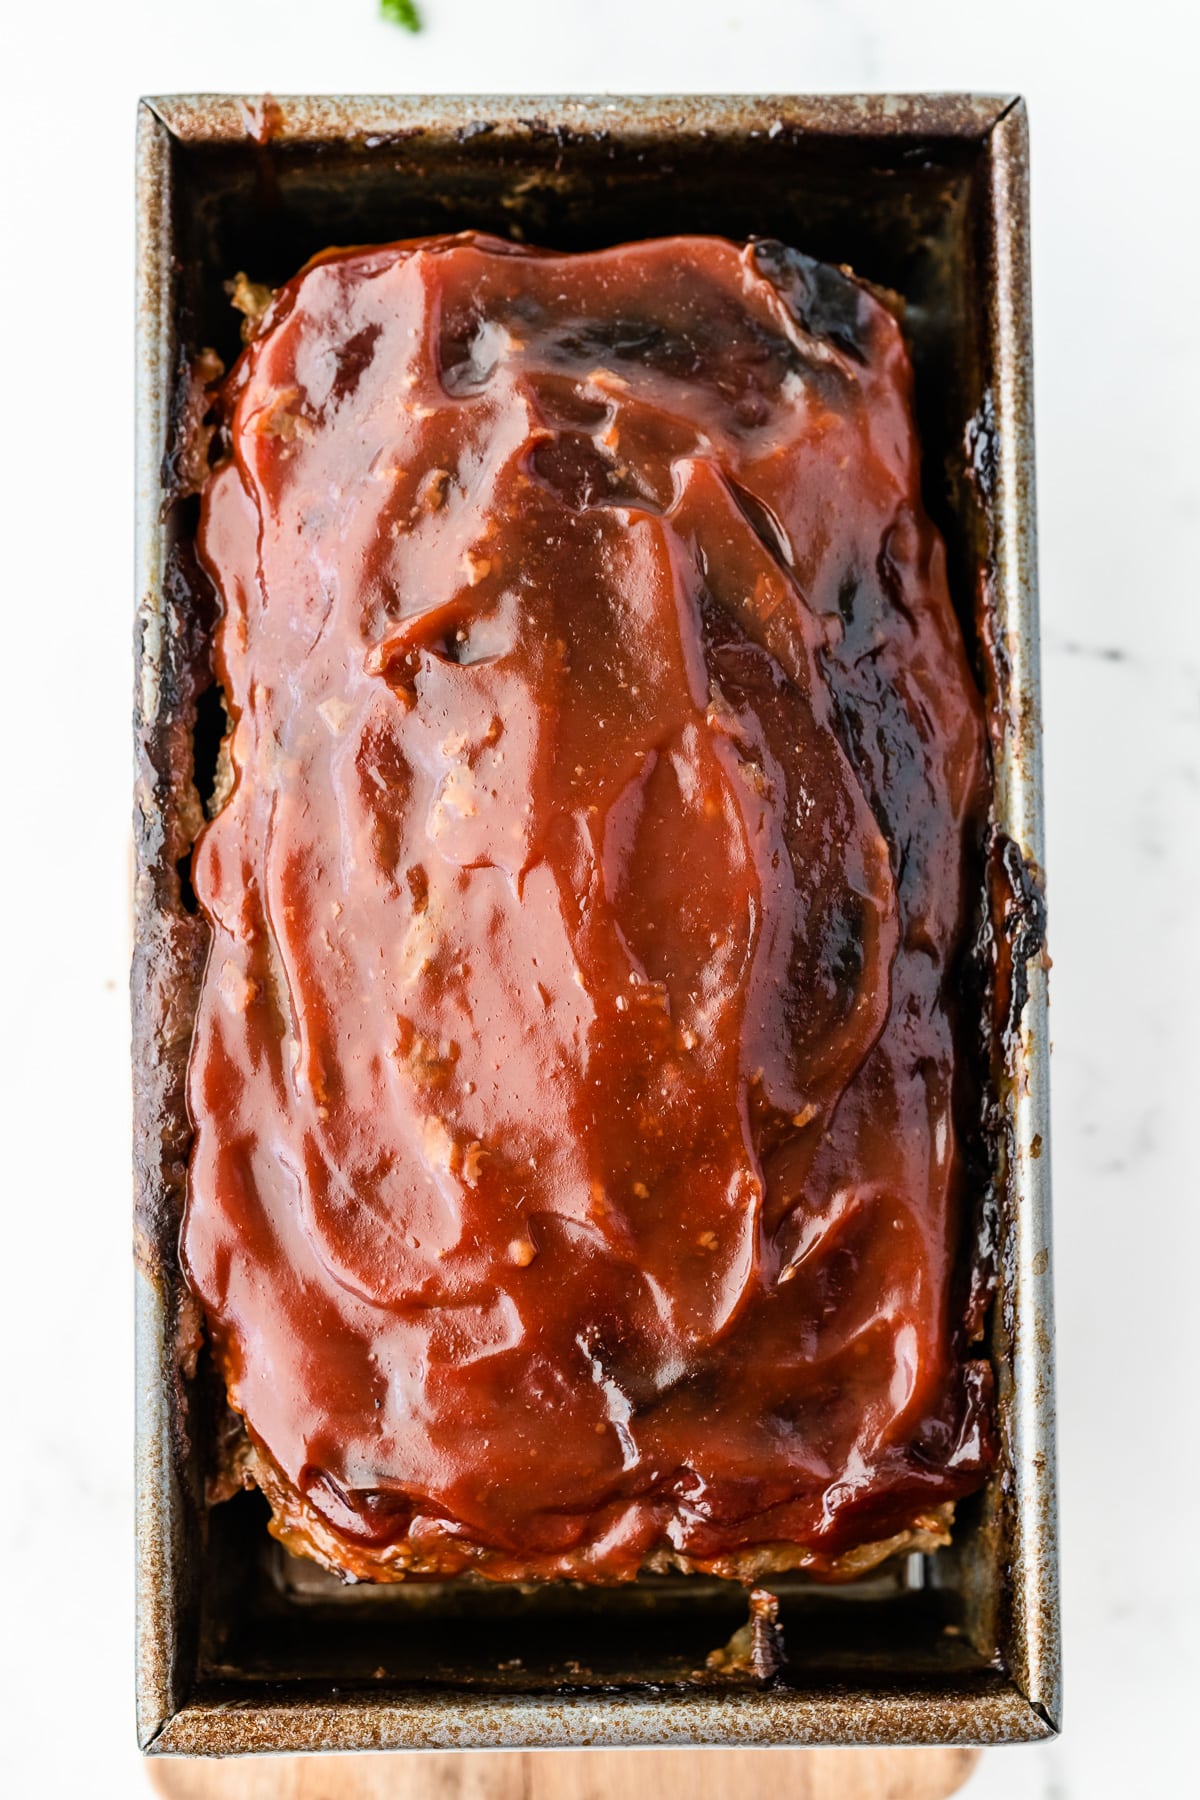 A meatloaf cooked in a pan with a sauce on top.